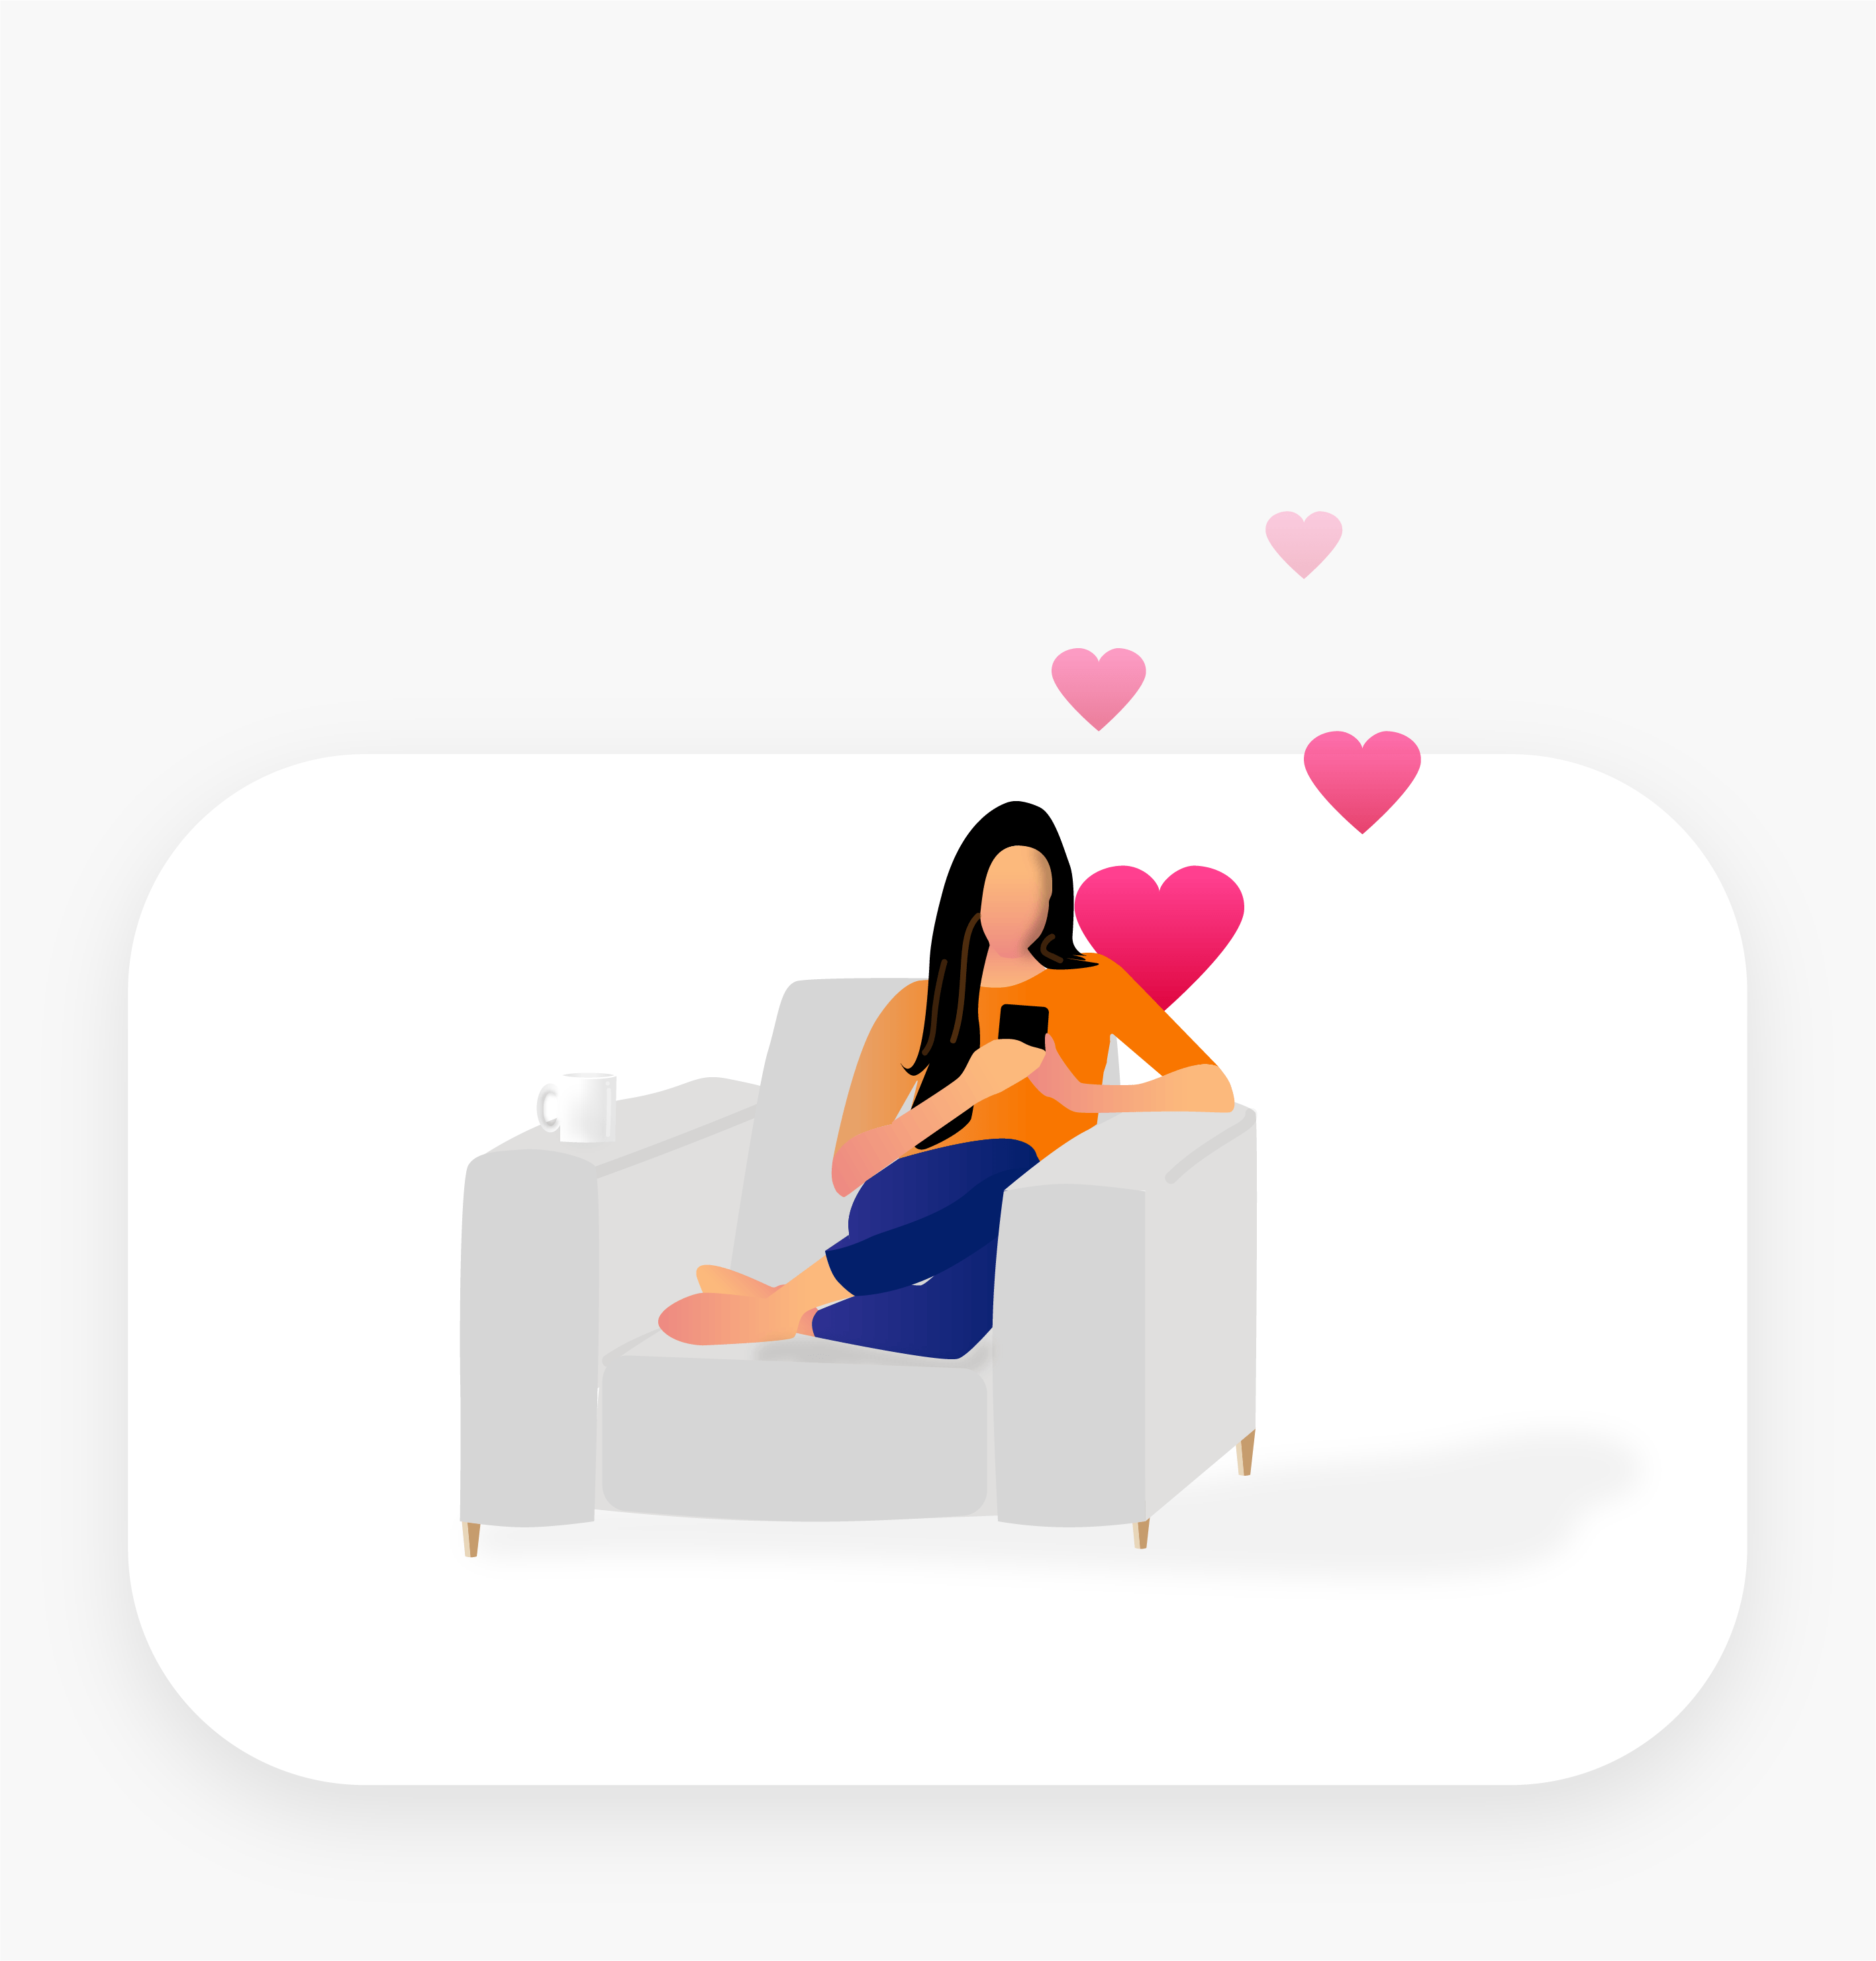 Illustration of woman sitting on couch looking at smartphone with hearts floating upwards